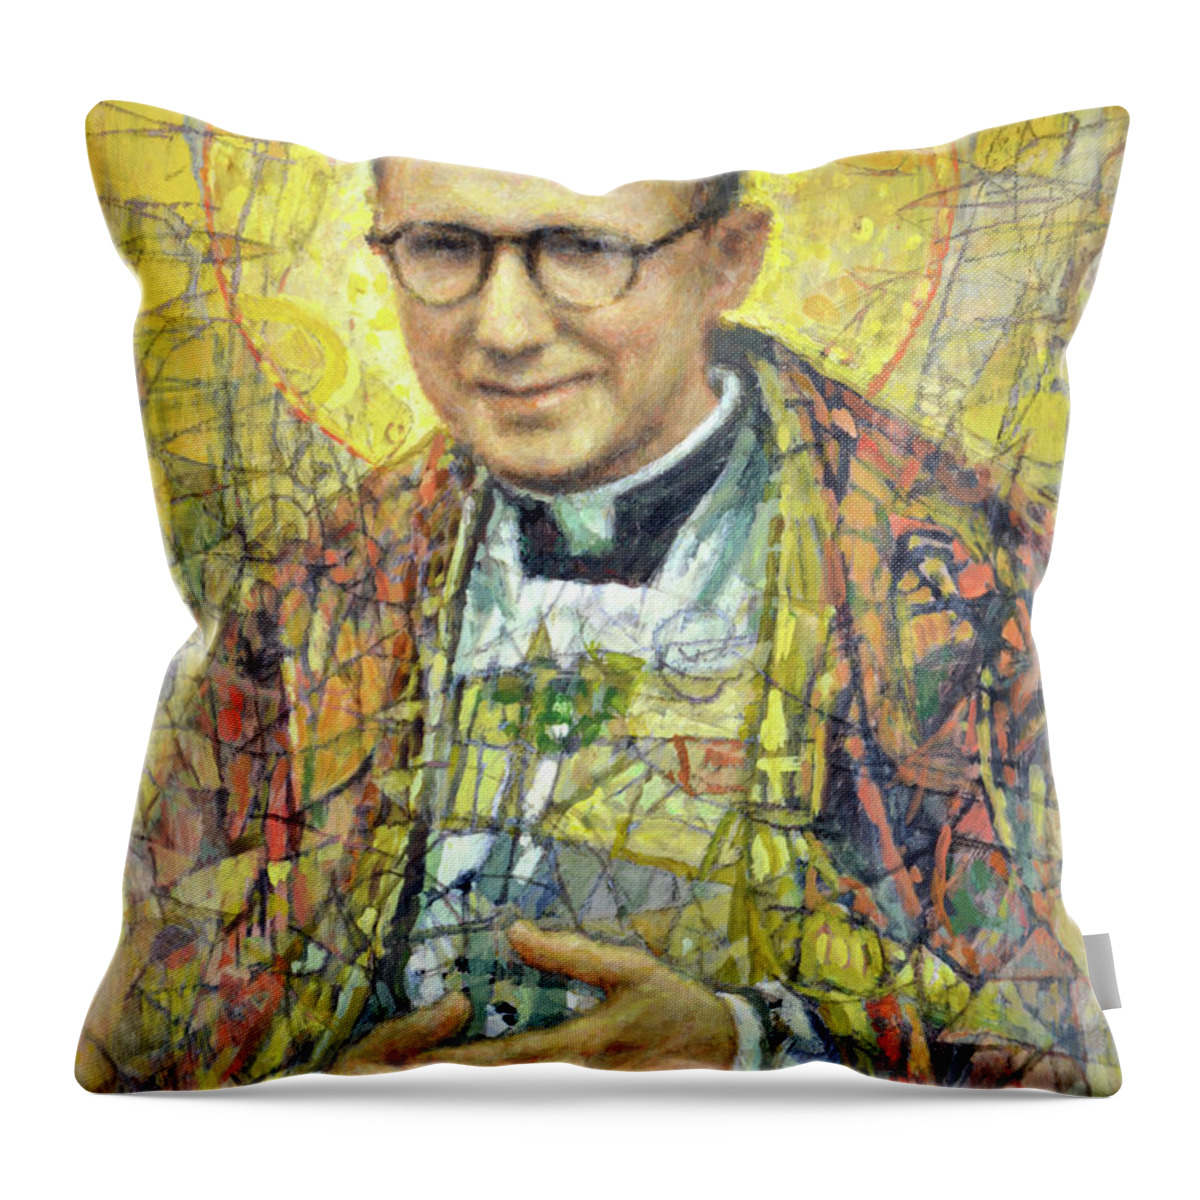 Saint Throw Pillow featuring the painting St. Jose Maria Escriva by Cameron Smith